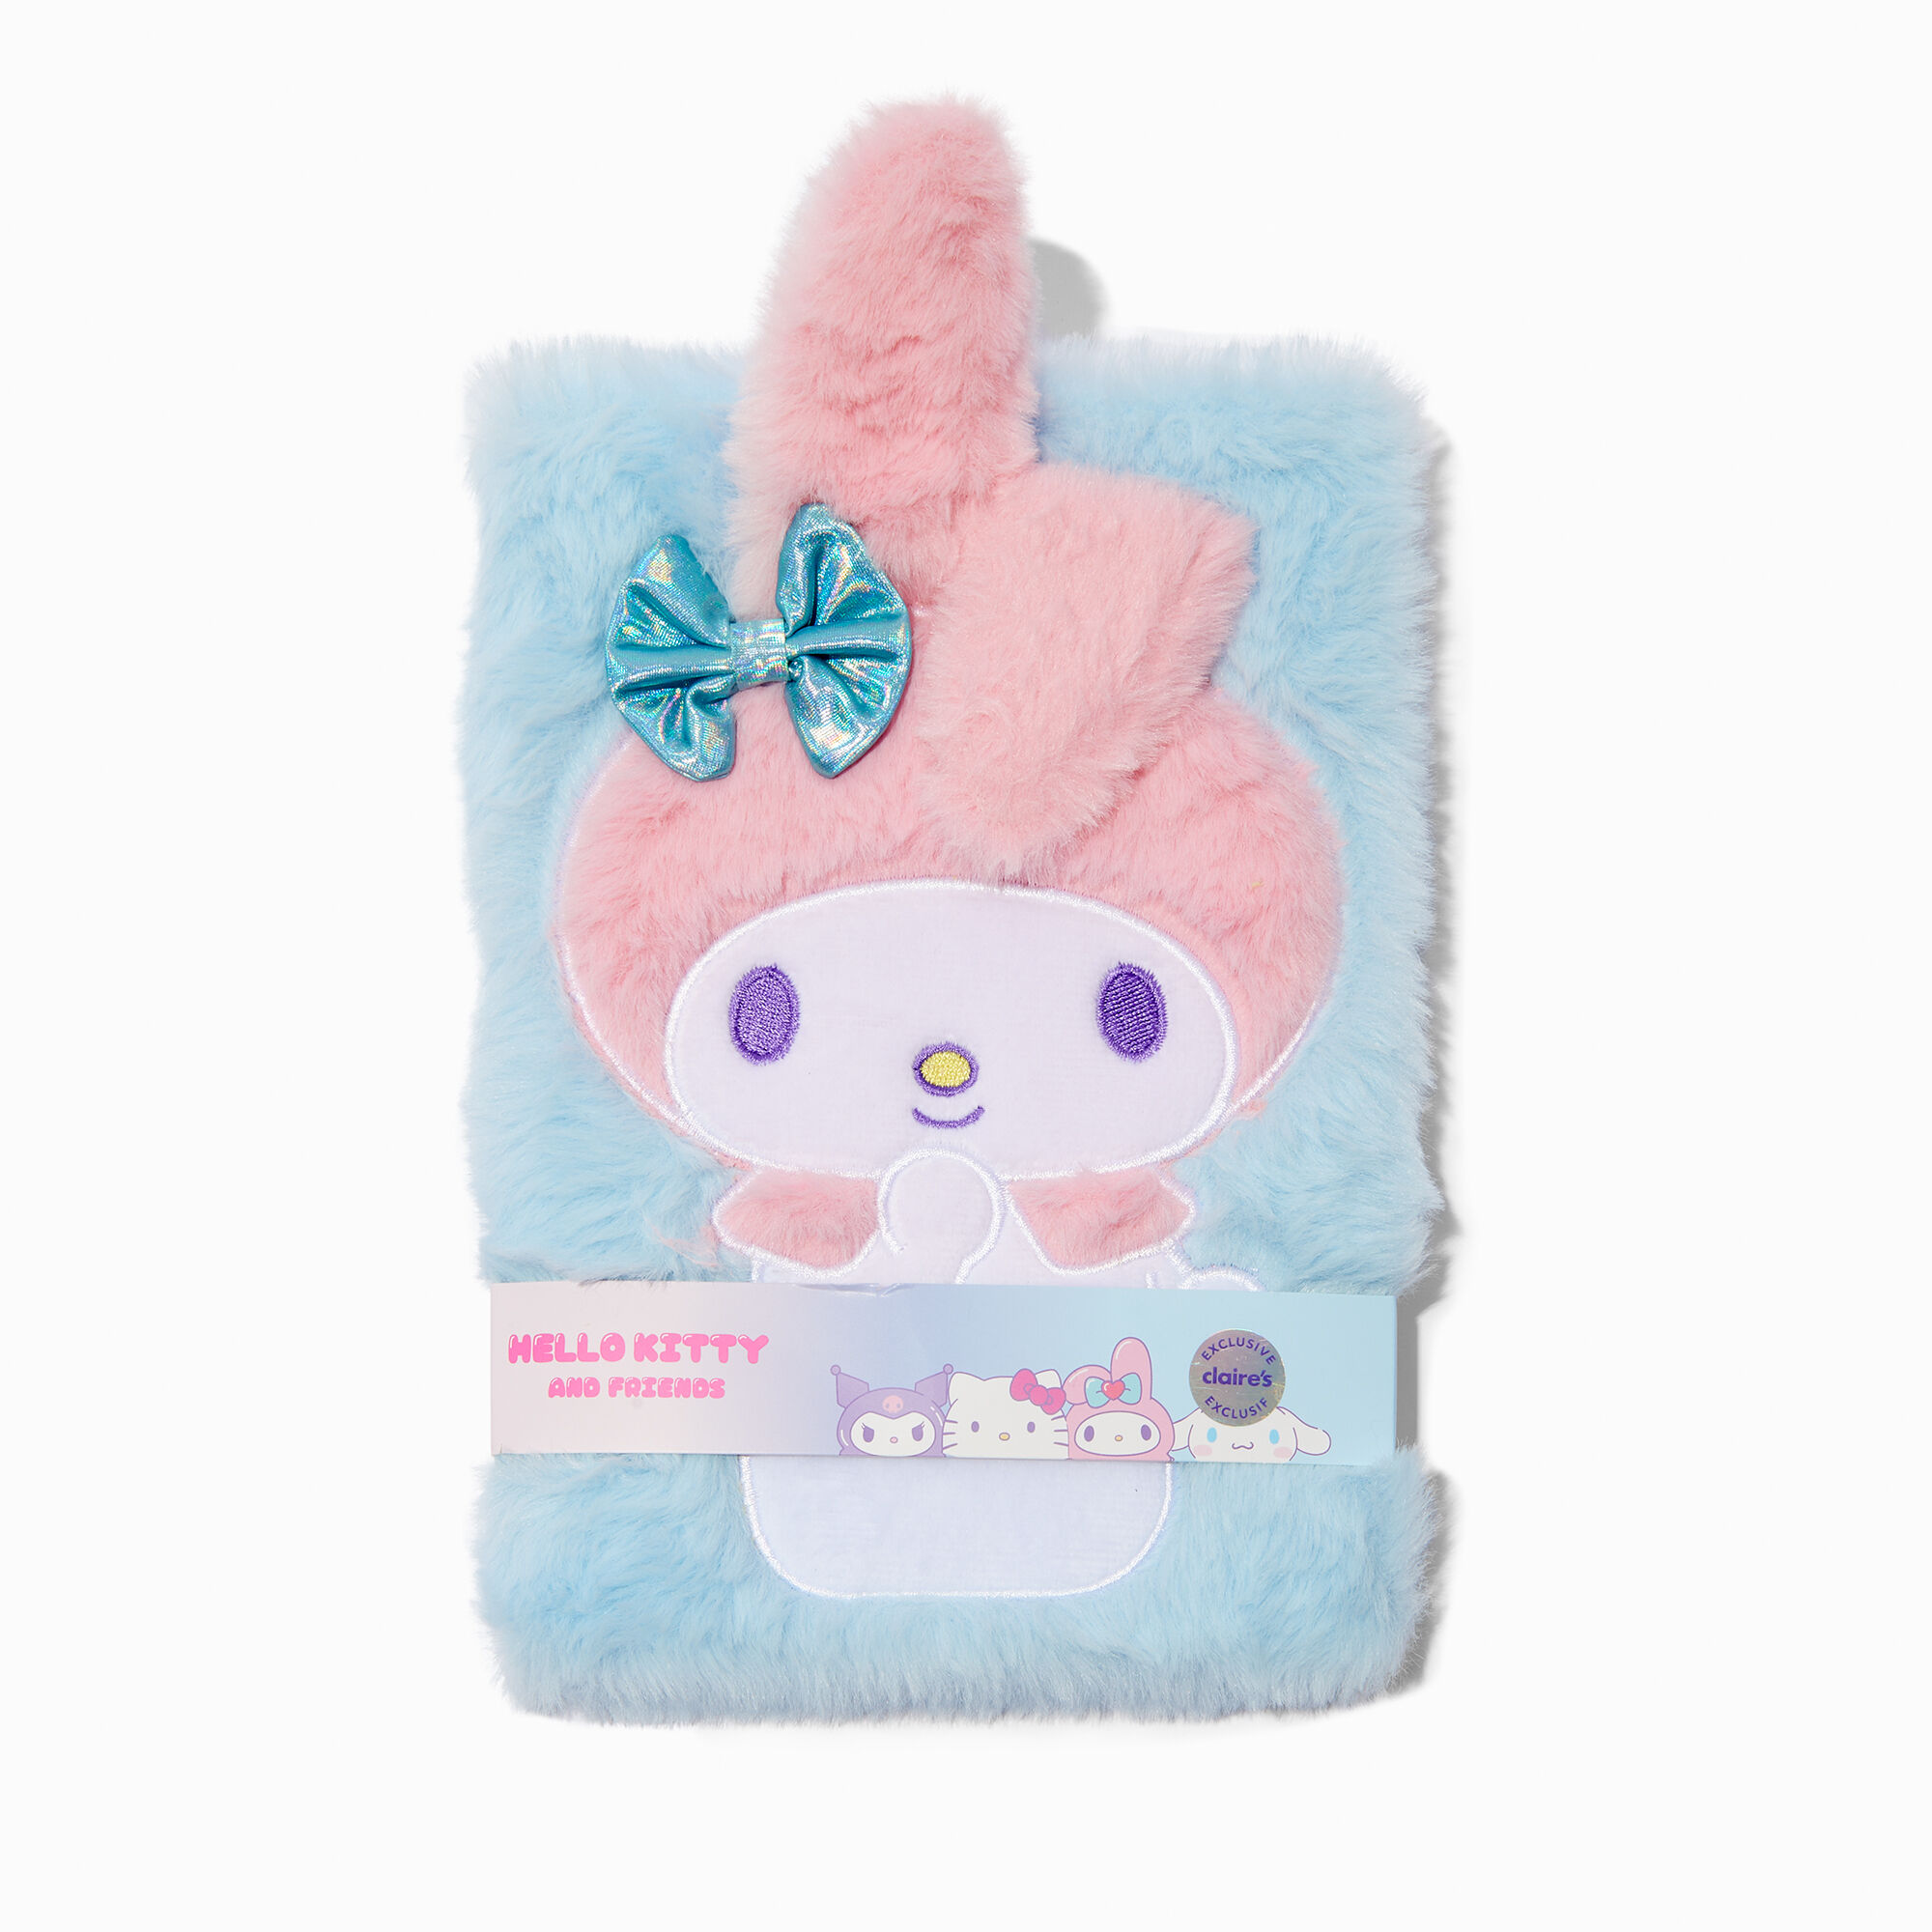 View Hello Kitty And Friends Claires Exclusive My Melody Plush Notebook information